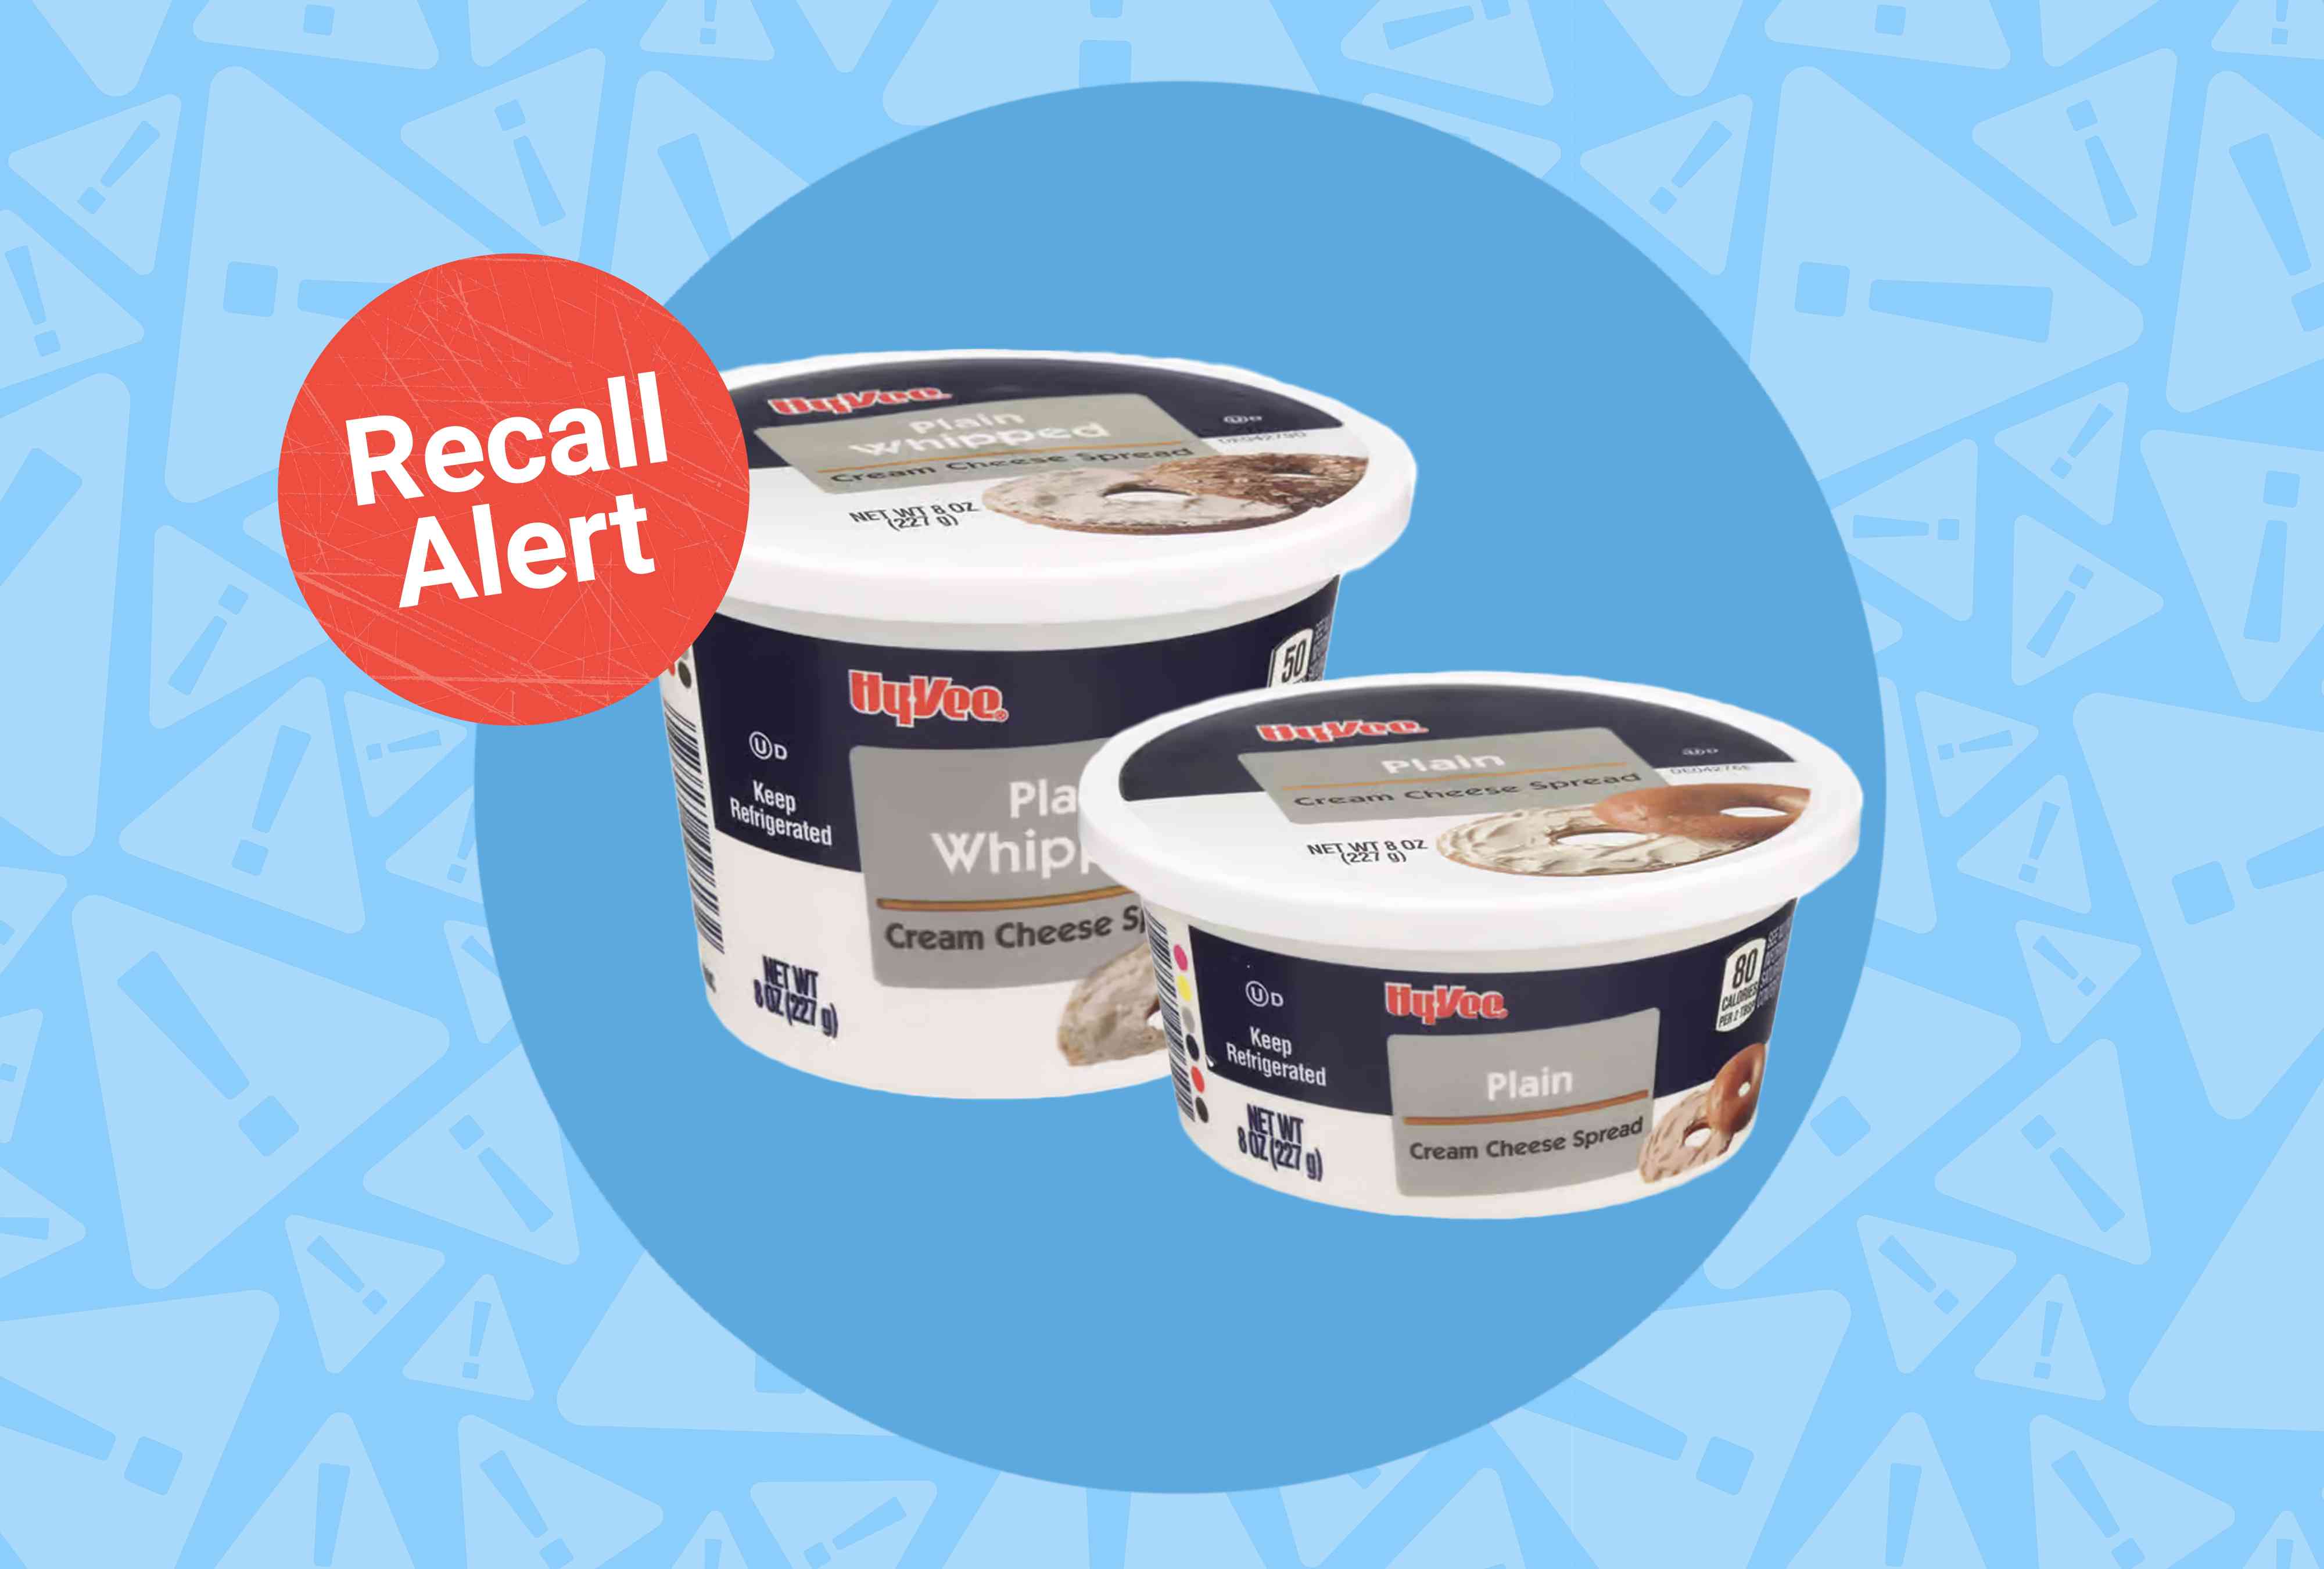 cream cheese recalled in 8 states due to salmonella risk